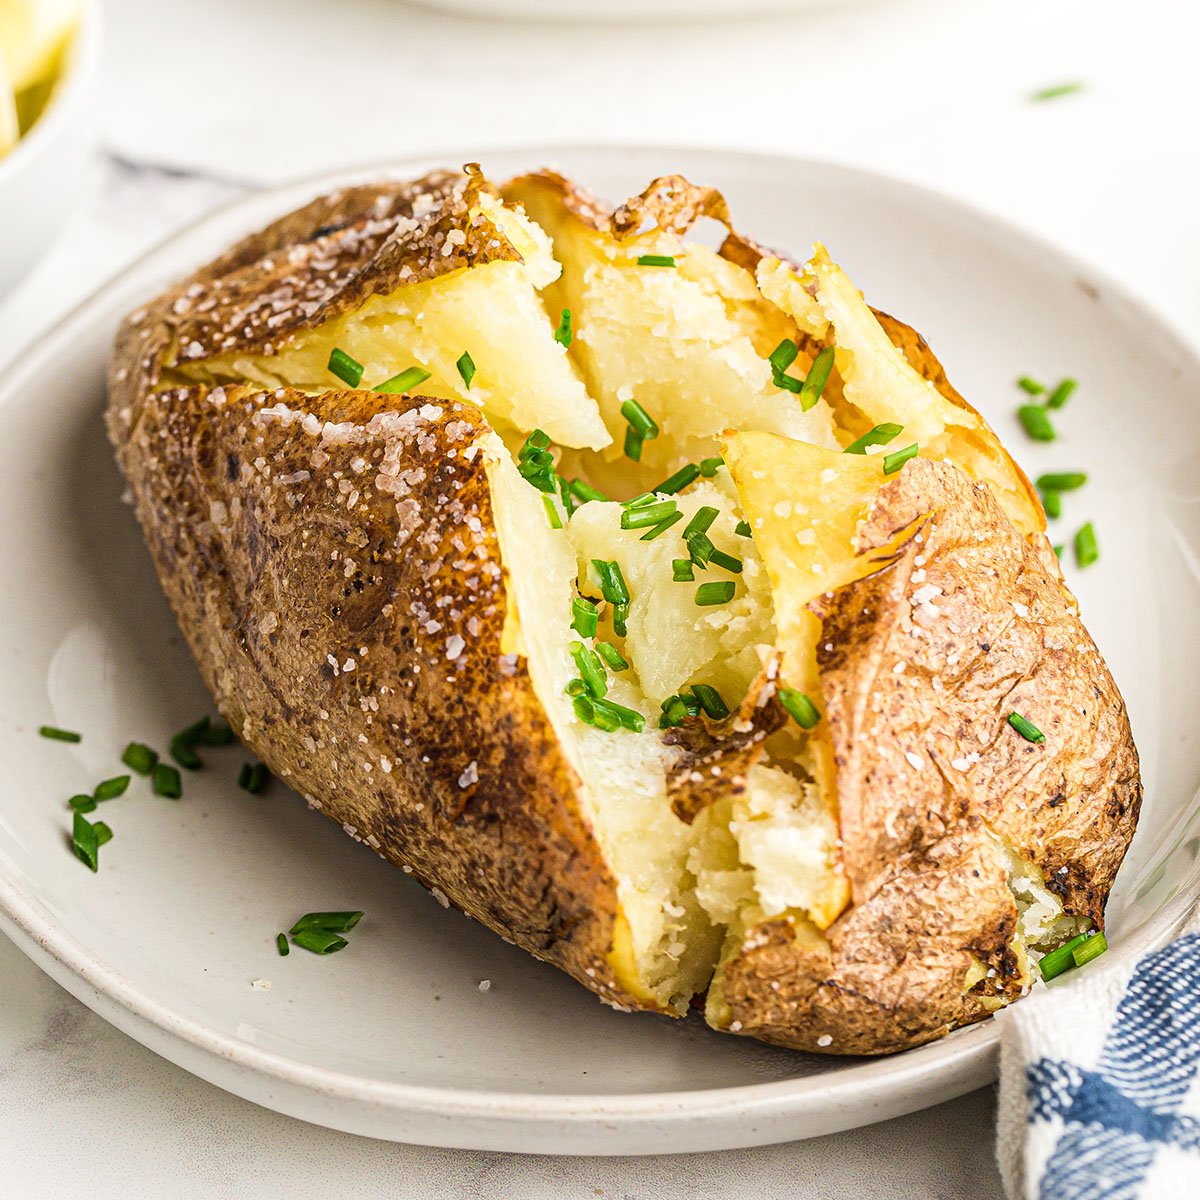 https://www.persnicketyplates.com/wp-content/uploads/2020/09/air-fryer-baked-potato-SQUARE.jpg